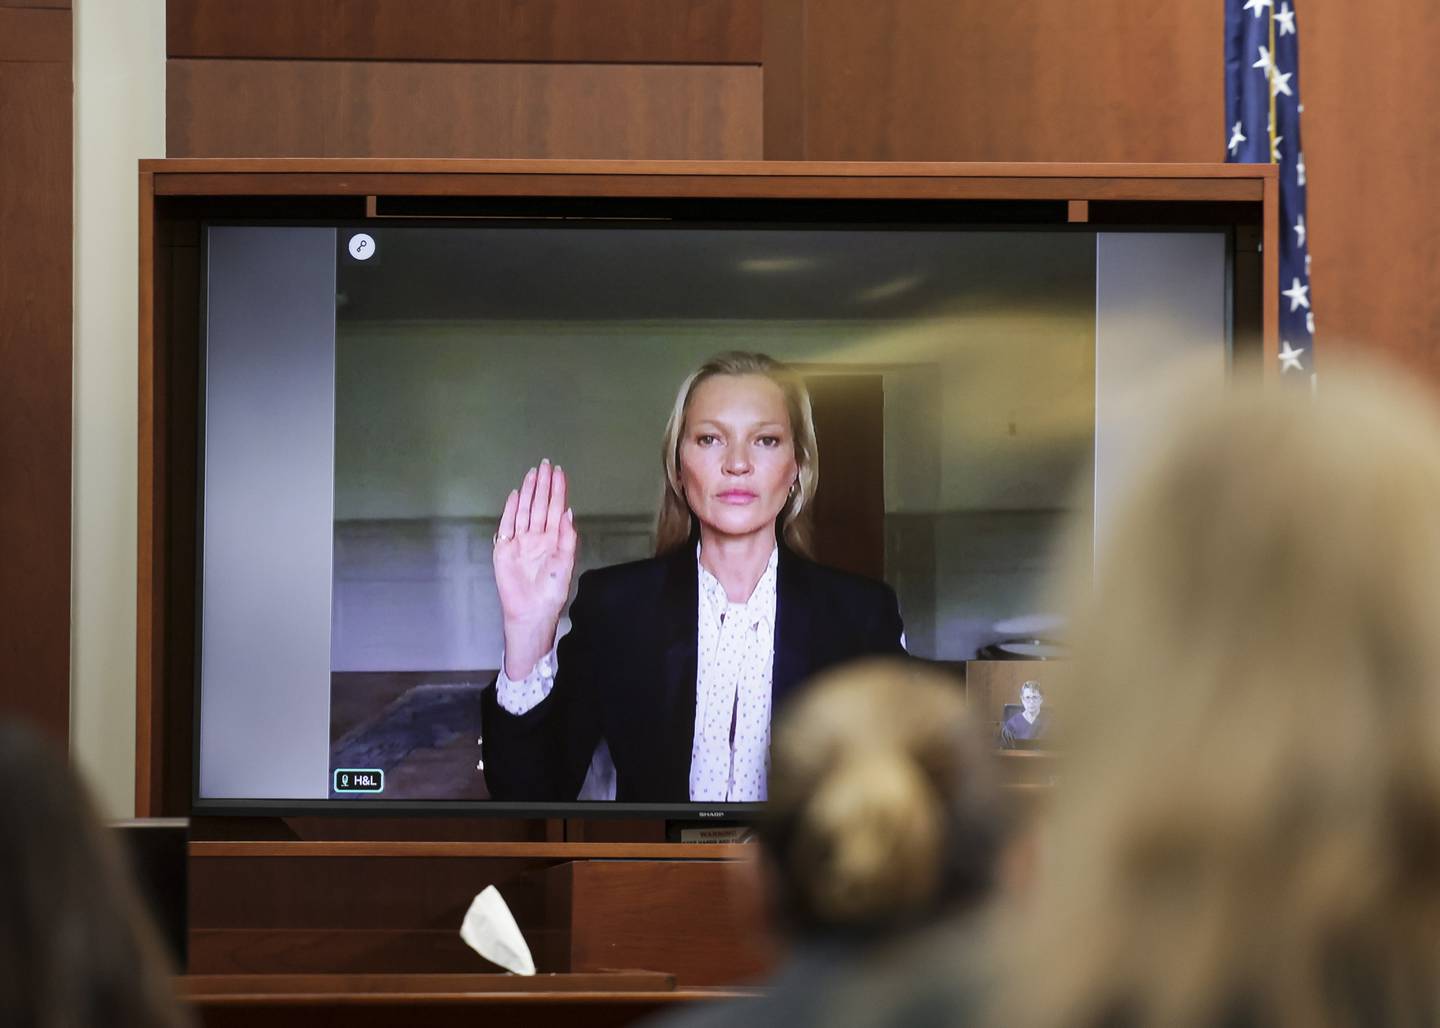 Model Kate Moss, a former girlfriend of actor Johnny Depp, is sworn in to testify via video link during Depp's defamation trial against his ex-wife Amber Heard. EPA